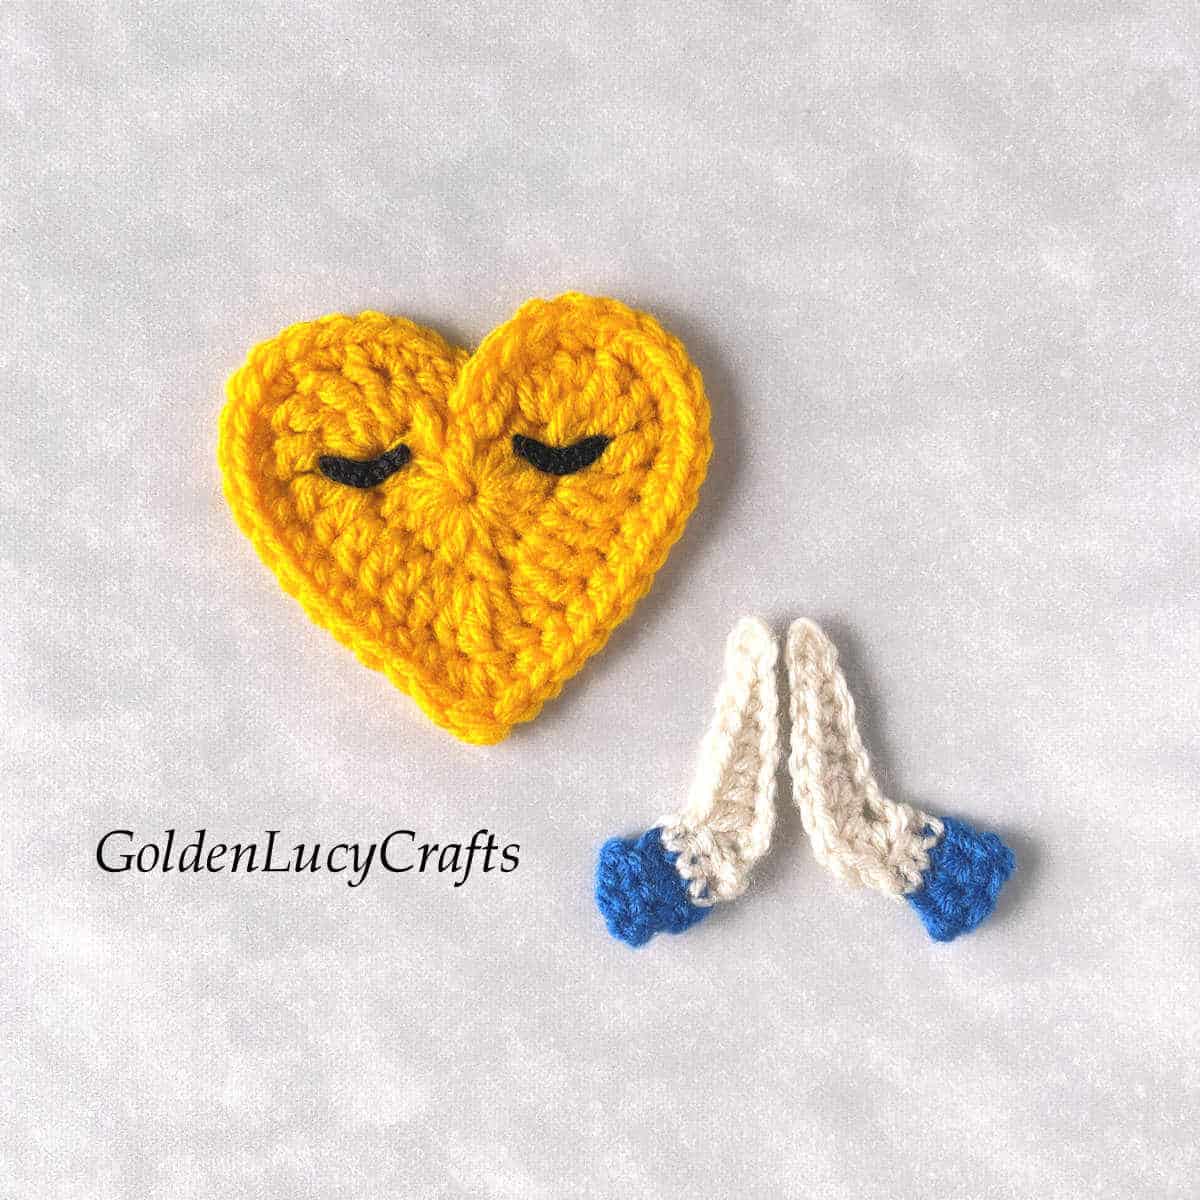 Crochet heart-shaped face and praying hands.